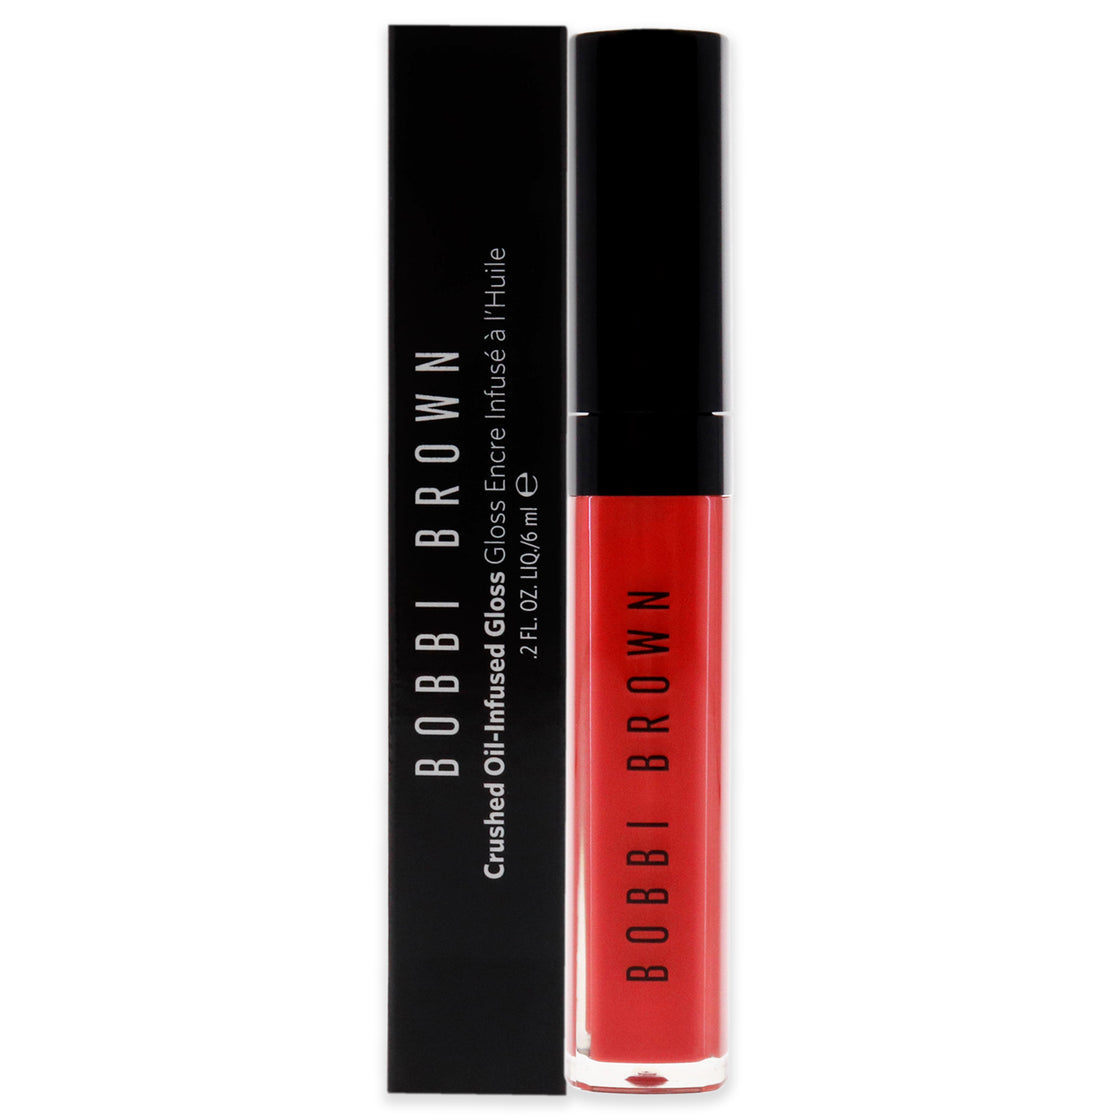 Crushed Oil-Infused Gloss - Freestyle by Bobbi Brown for Women - 0.2 oz Lip Gloss